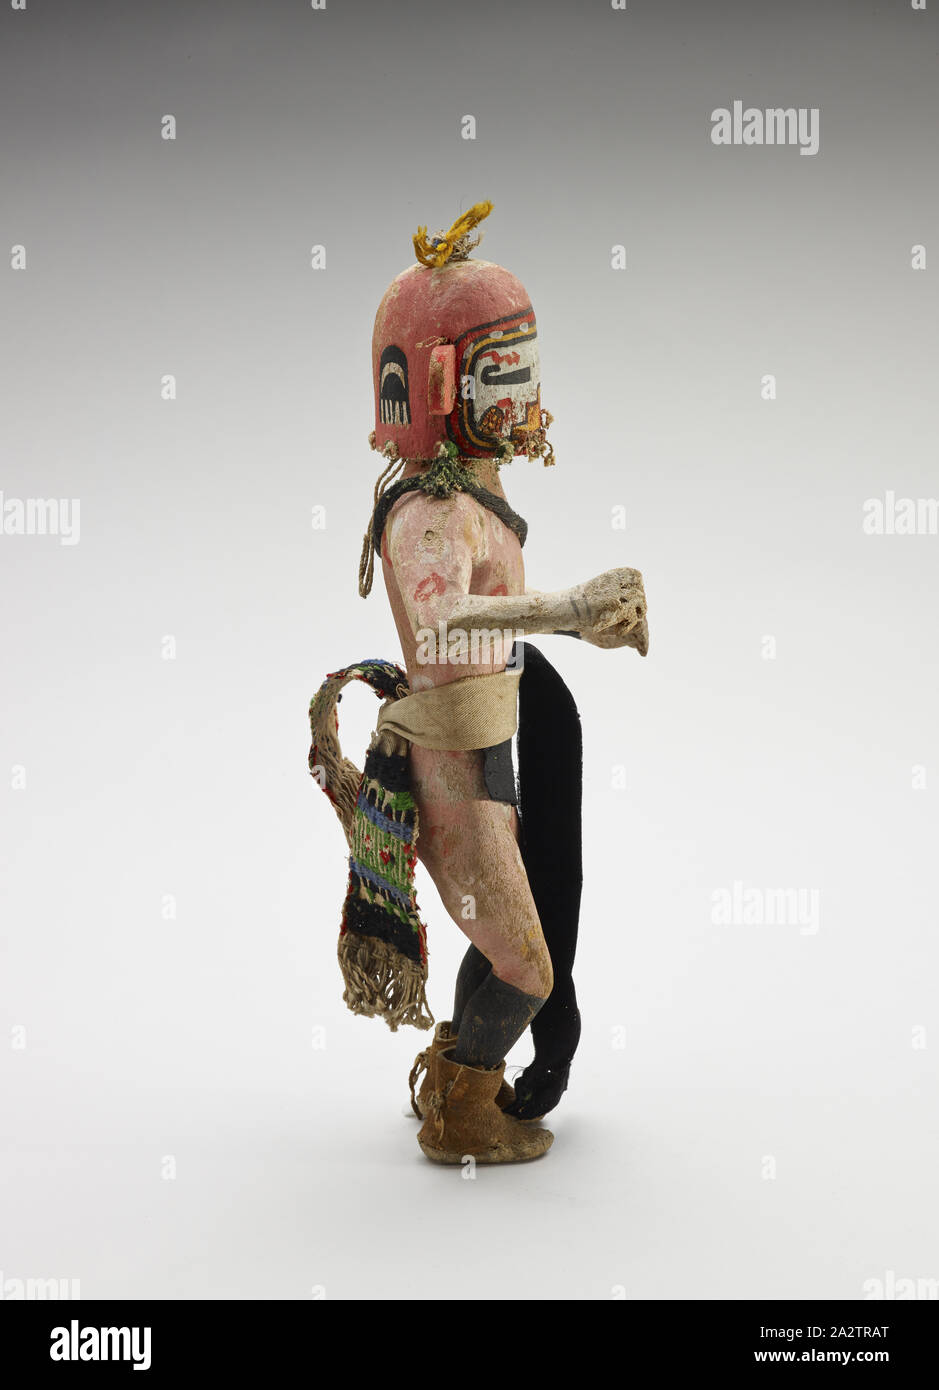 kachina doll, Hopi people, 1930-1960, wood, pigment, cloth, 13 x 6-1/4 x 4 in., Native Arts of the Americas Stock Photo